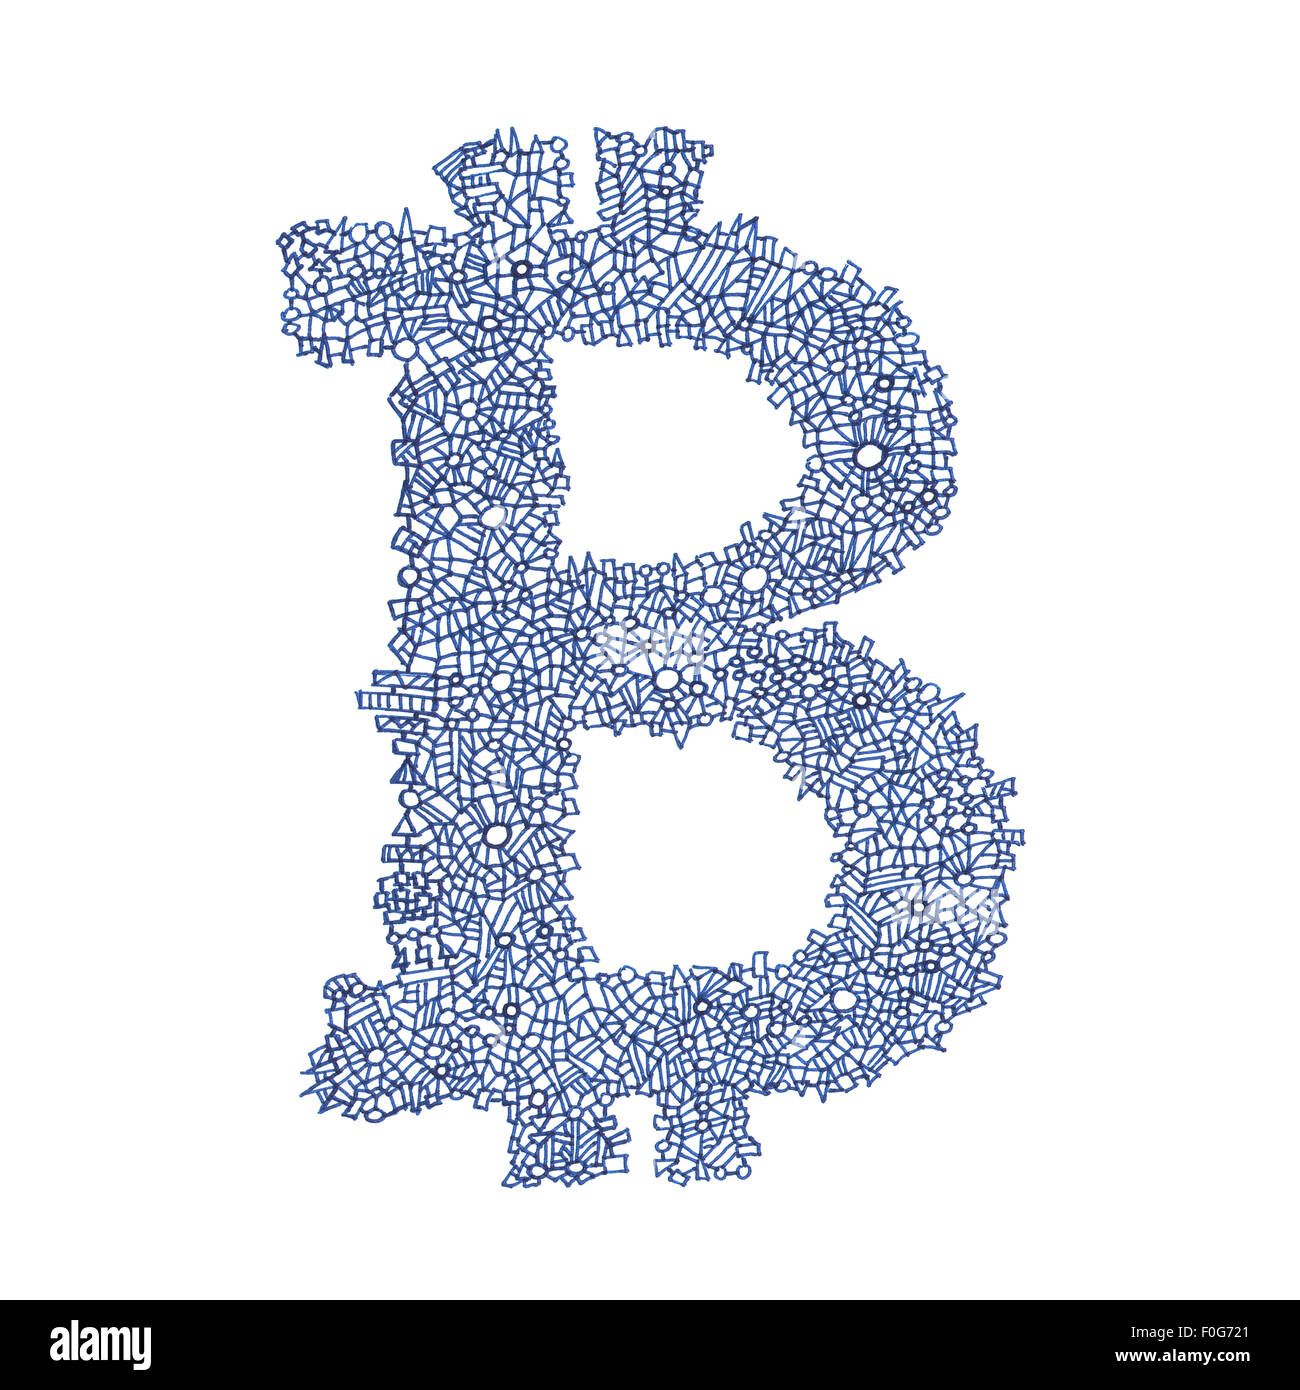 Bitcoin hand-drawn symbol of a digital decentralized crypto currency B&b Hot Water Heater Bypass Valve